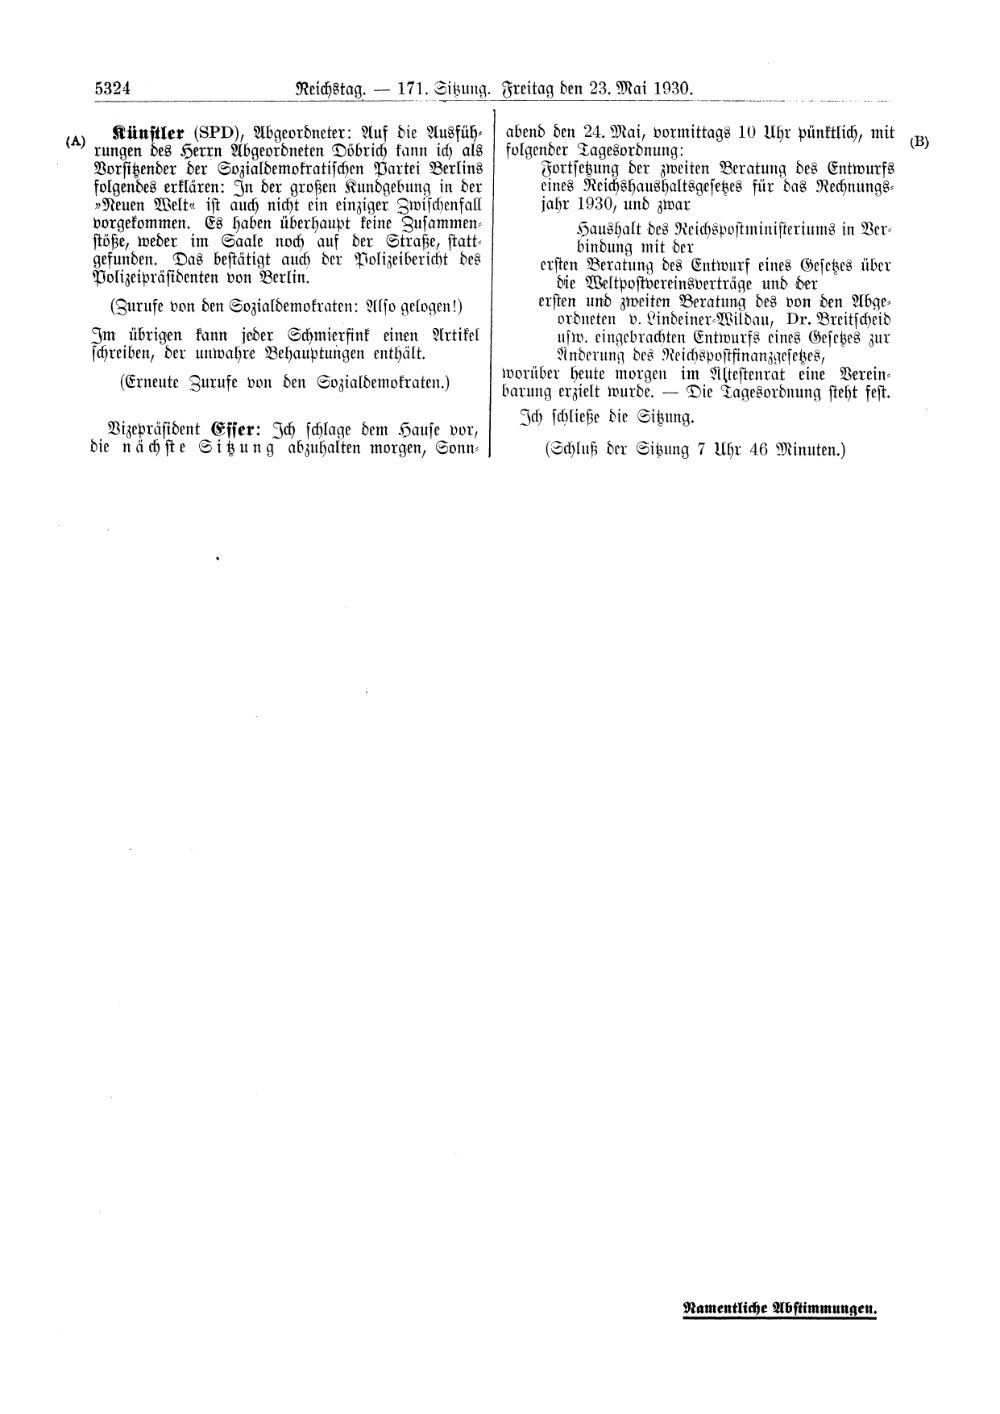 Scan of page 5324